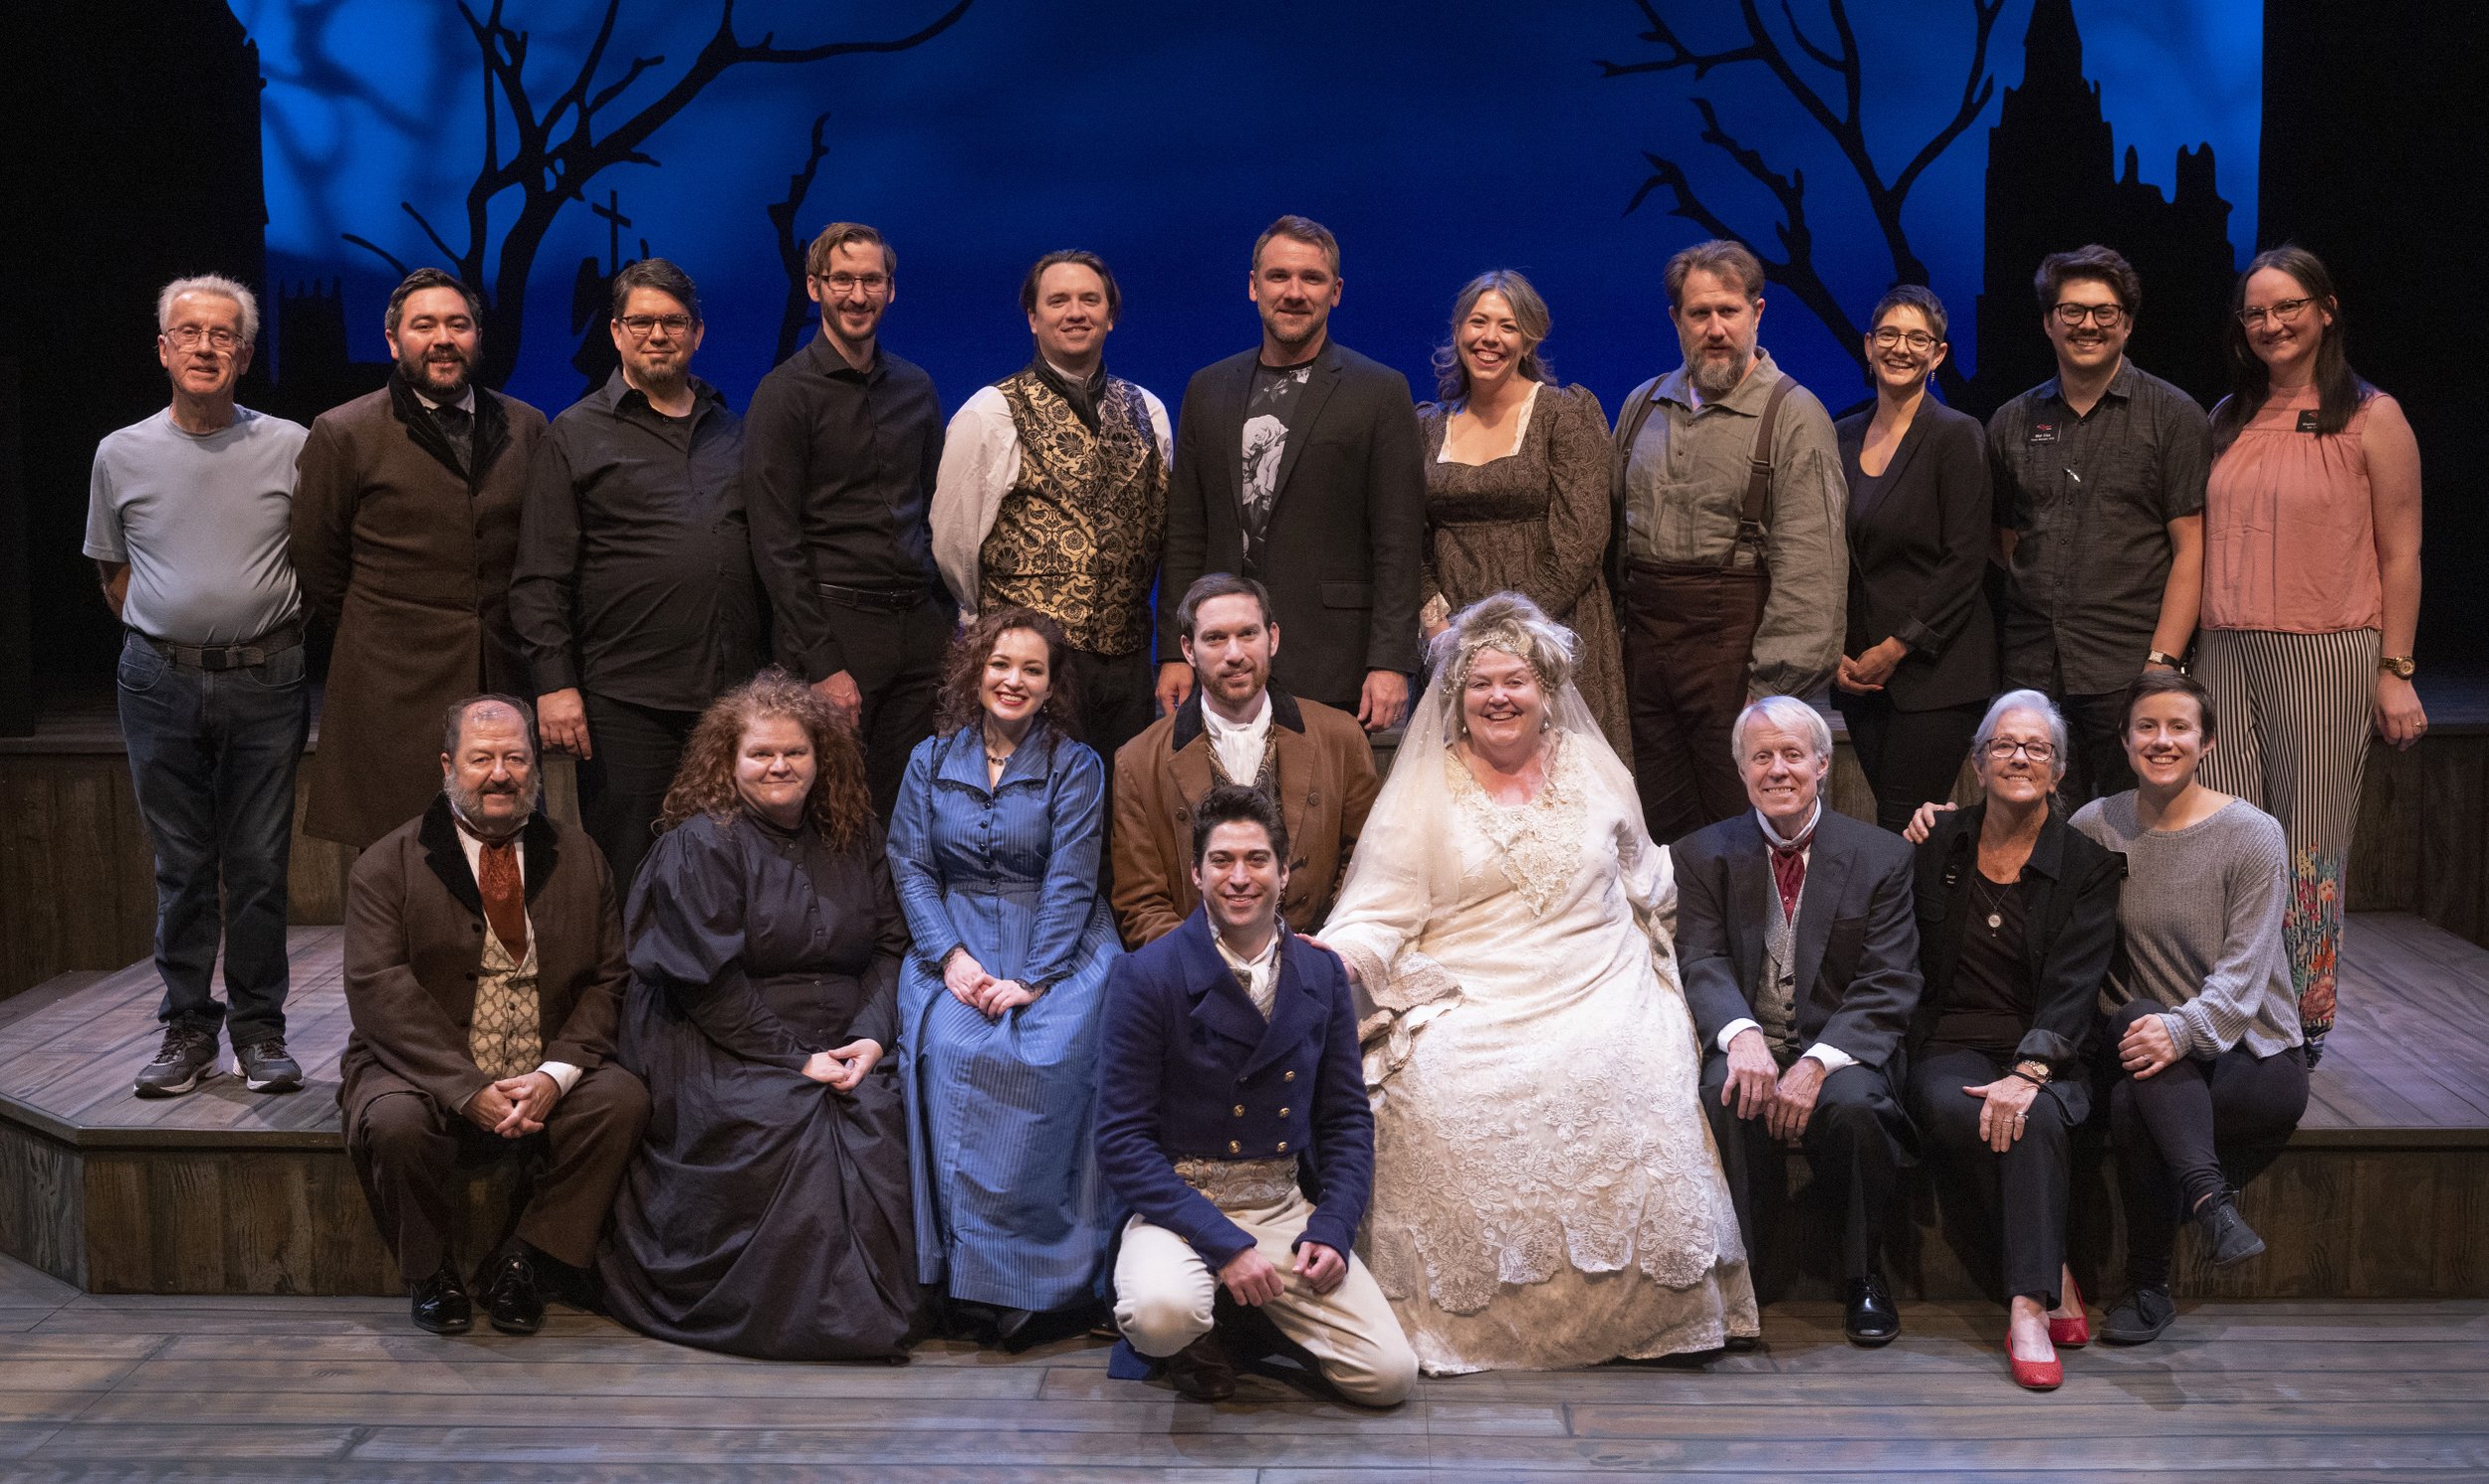 The cast and crew of “Great Expectations.” Photo by Tim Fuller.